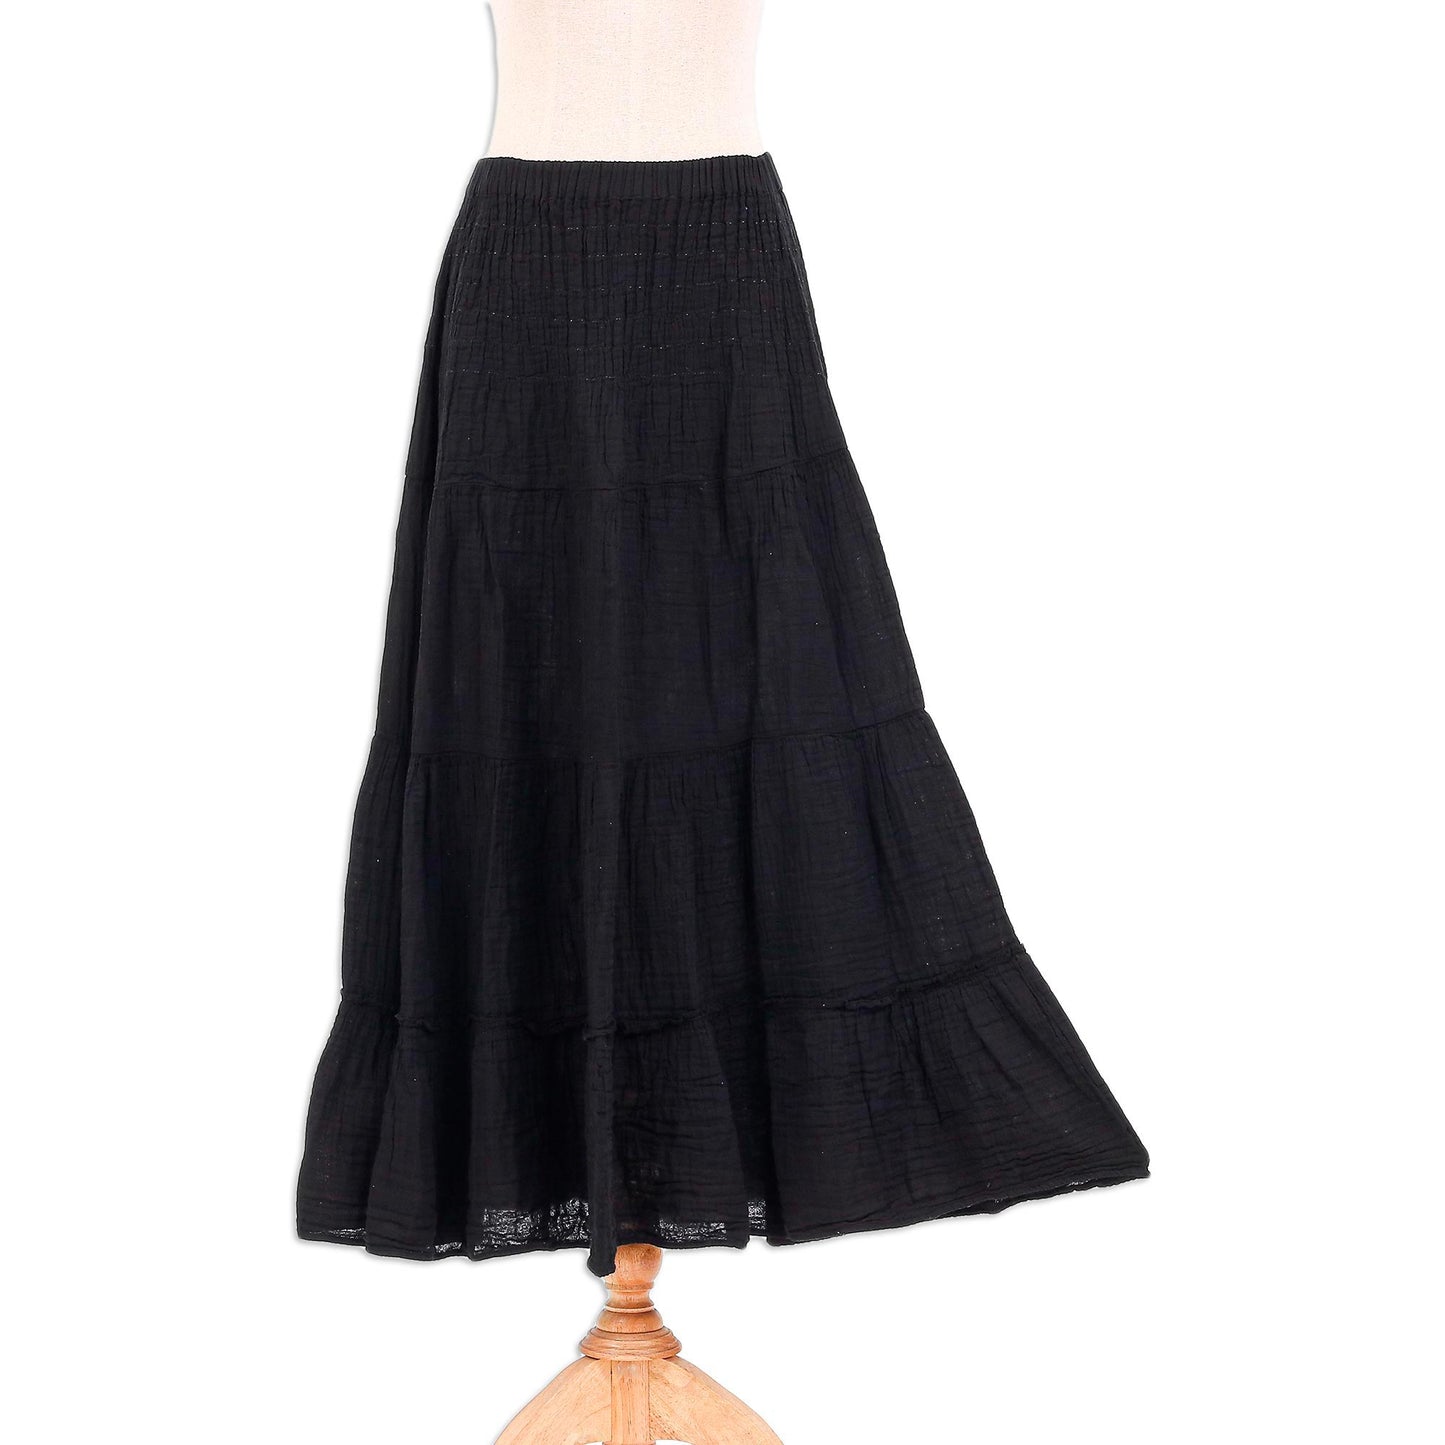 Simple Vow in Black Black Cotton Gauze Skirt from Thailand